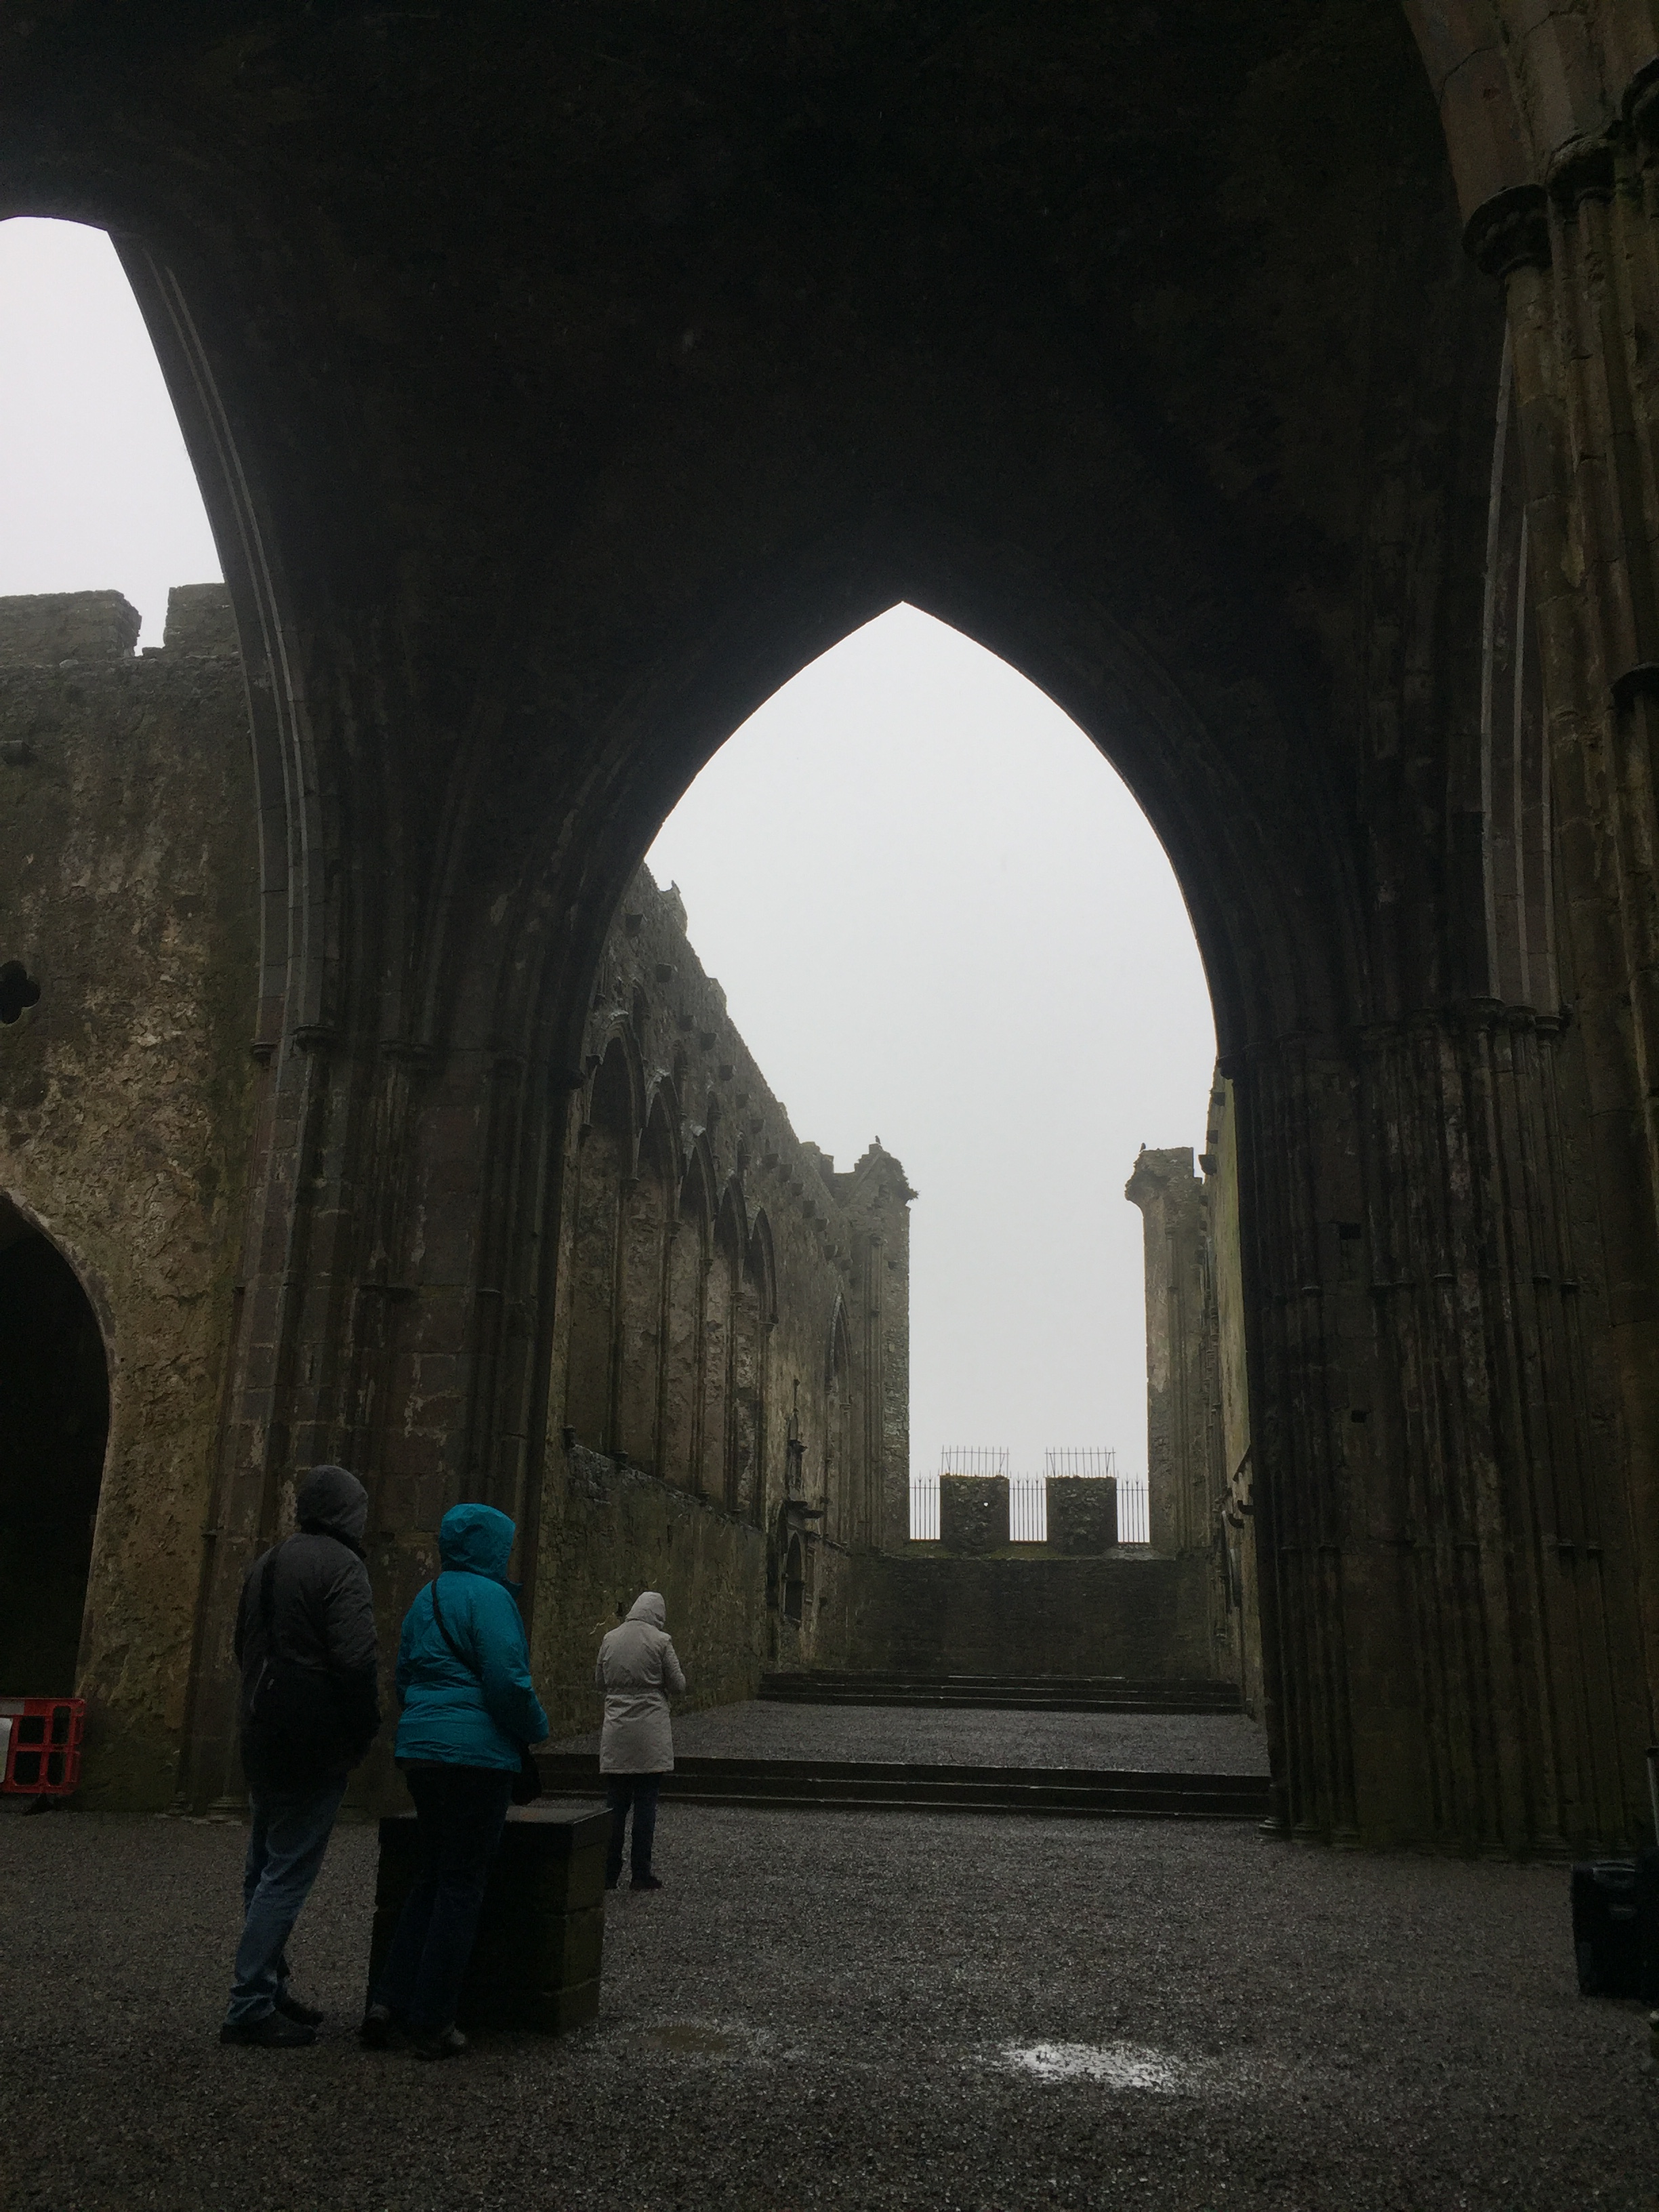 Visiting The Rock of Cashel, Ireland - And Here We Are